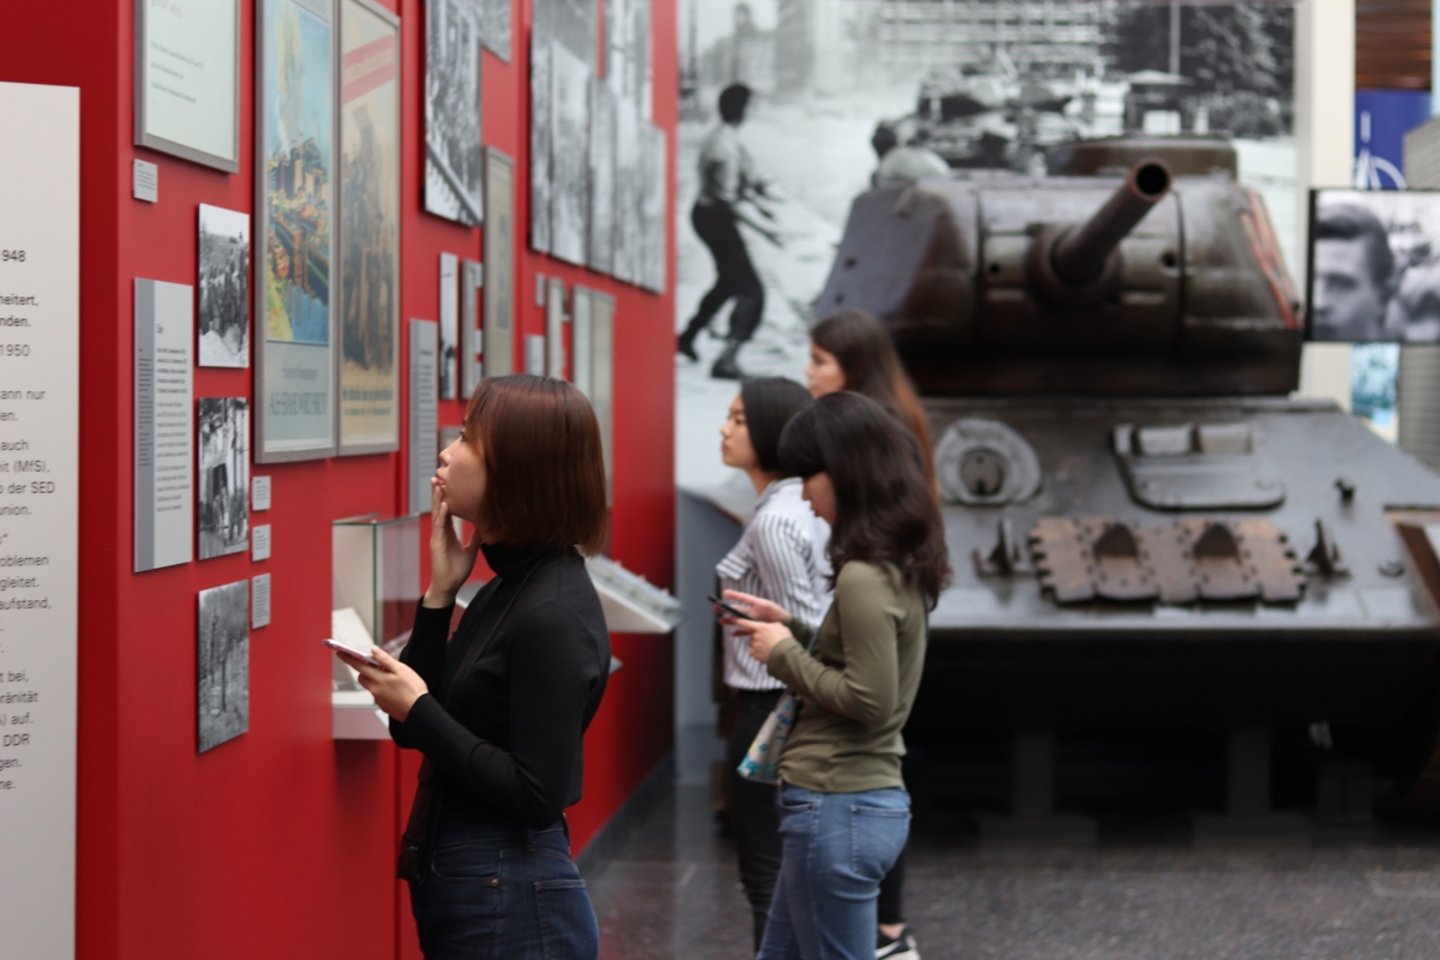 Students looking at the exhibits in the Haus der Geschichte. There is a tank in the background.